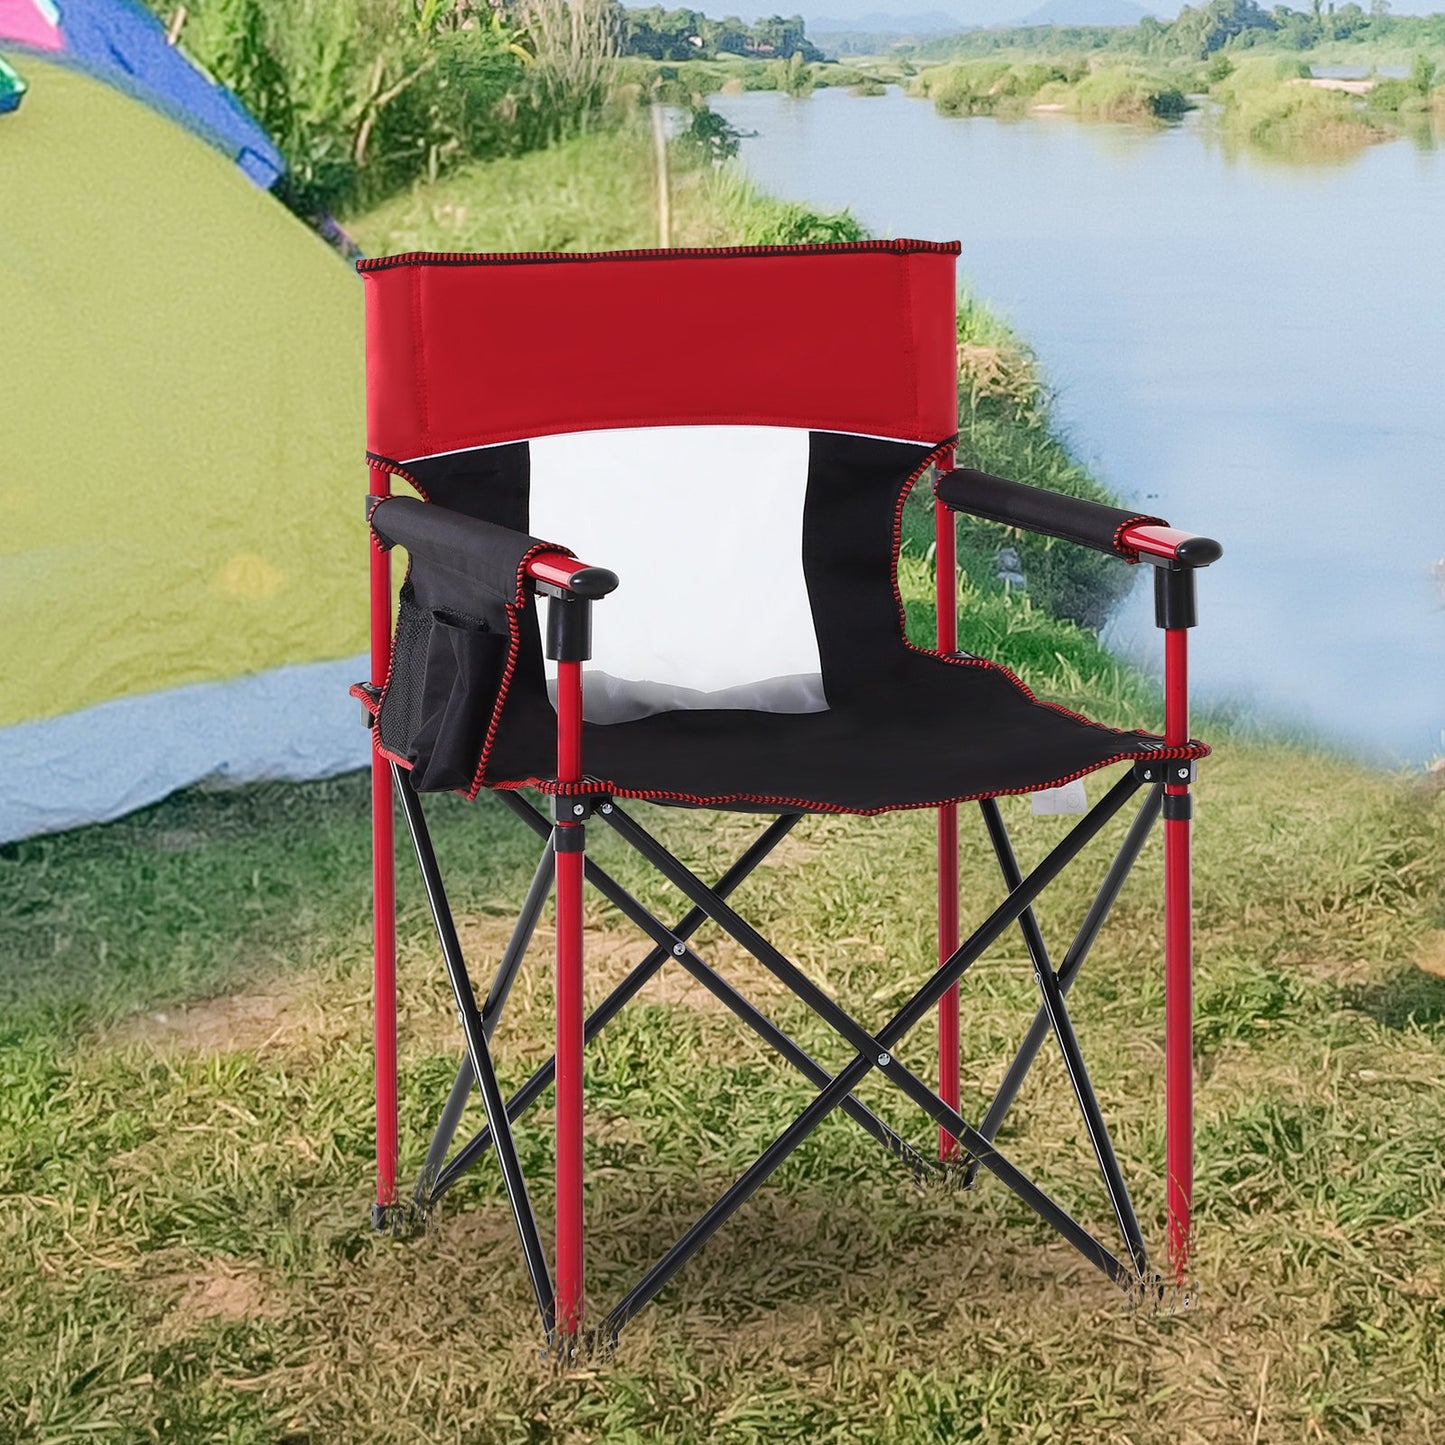 Outsunny Metal Frame Sponge Padded Folding Camping Chair w/ Pockets Red